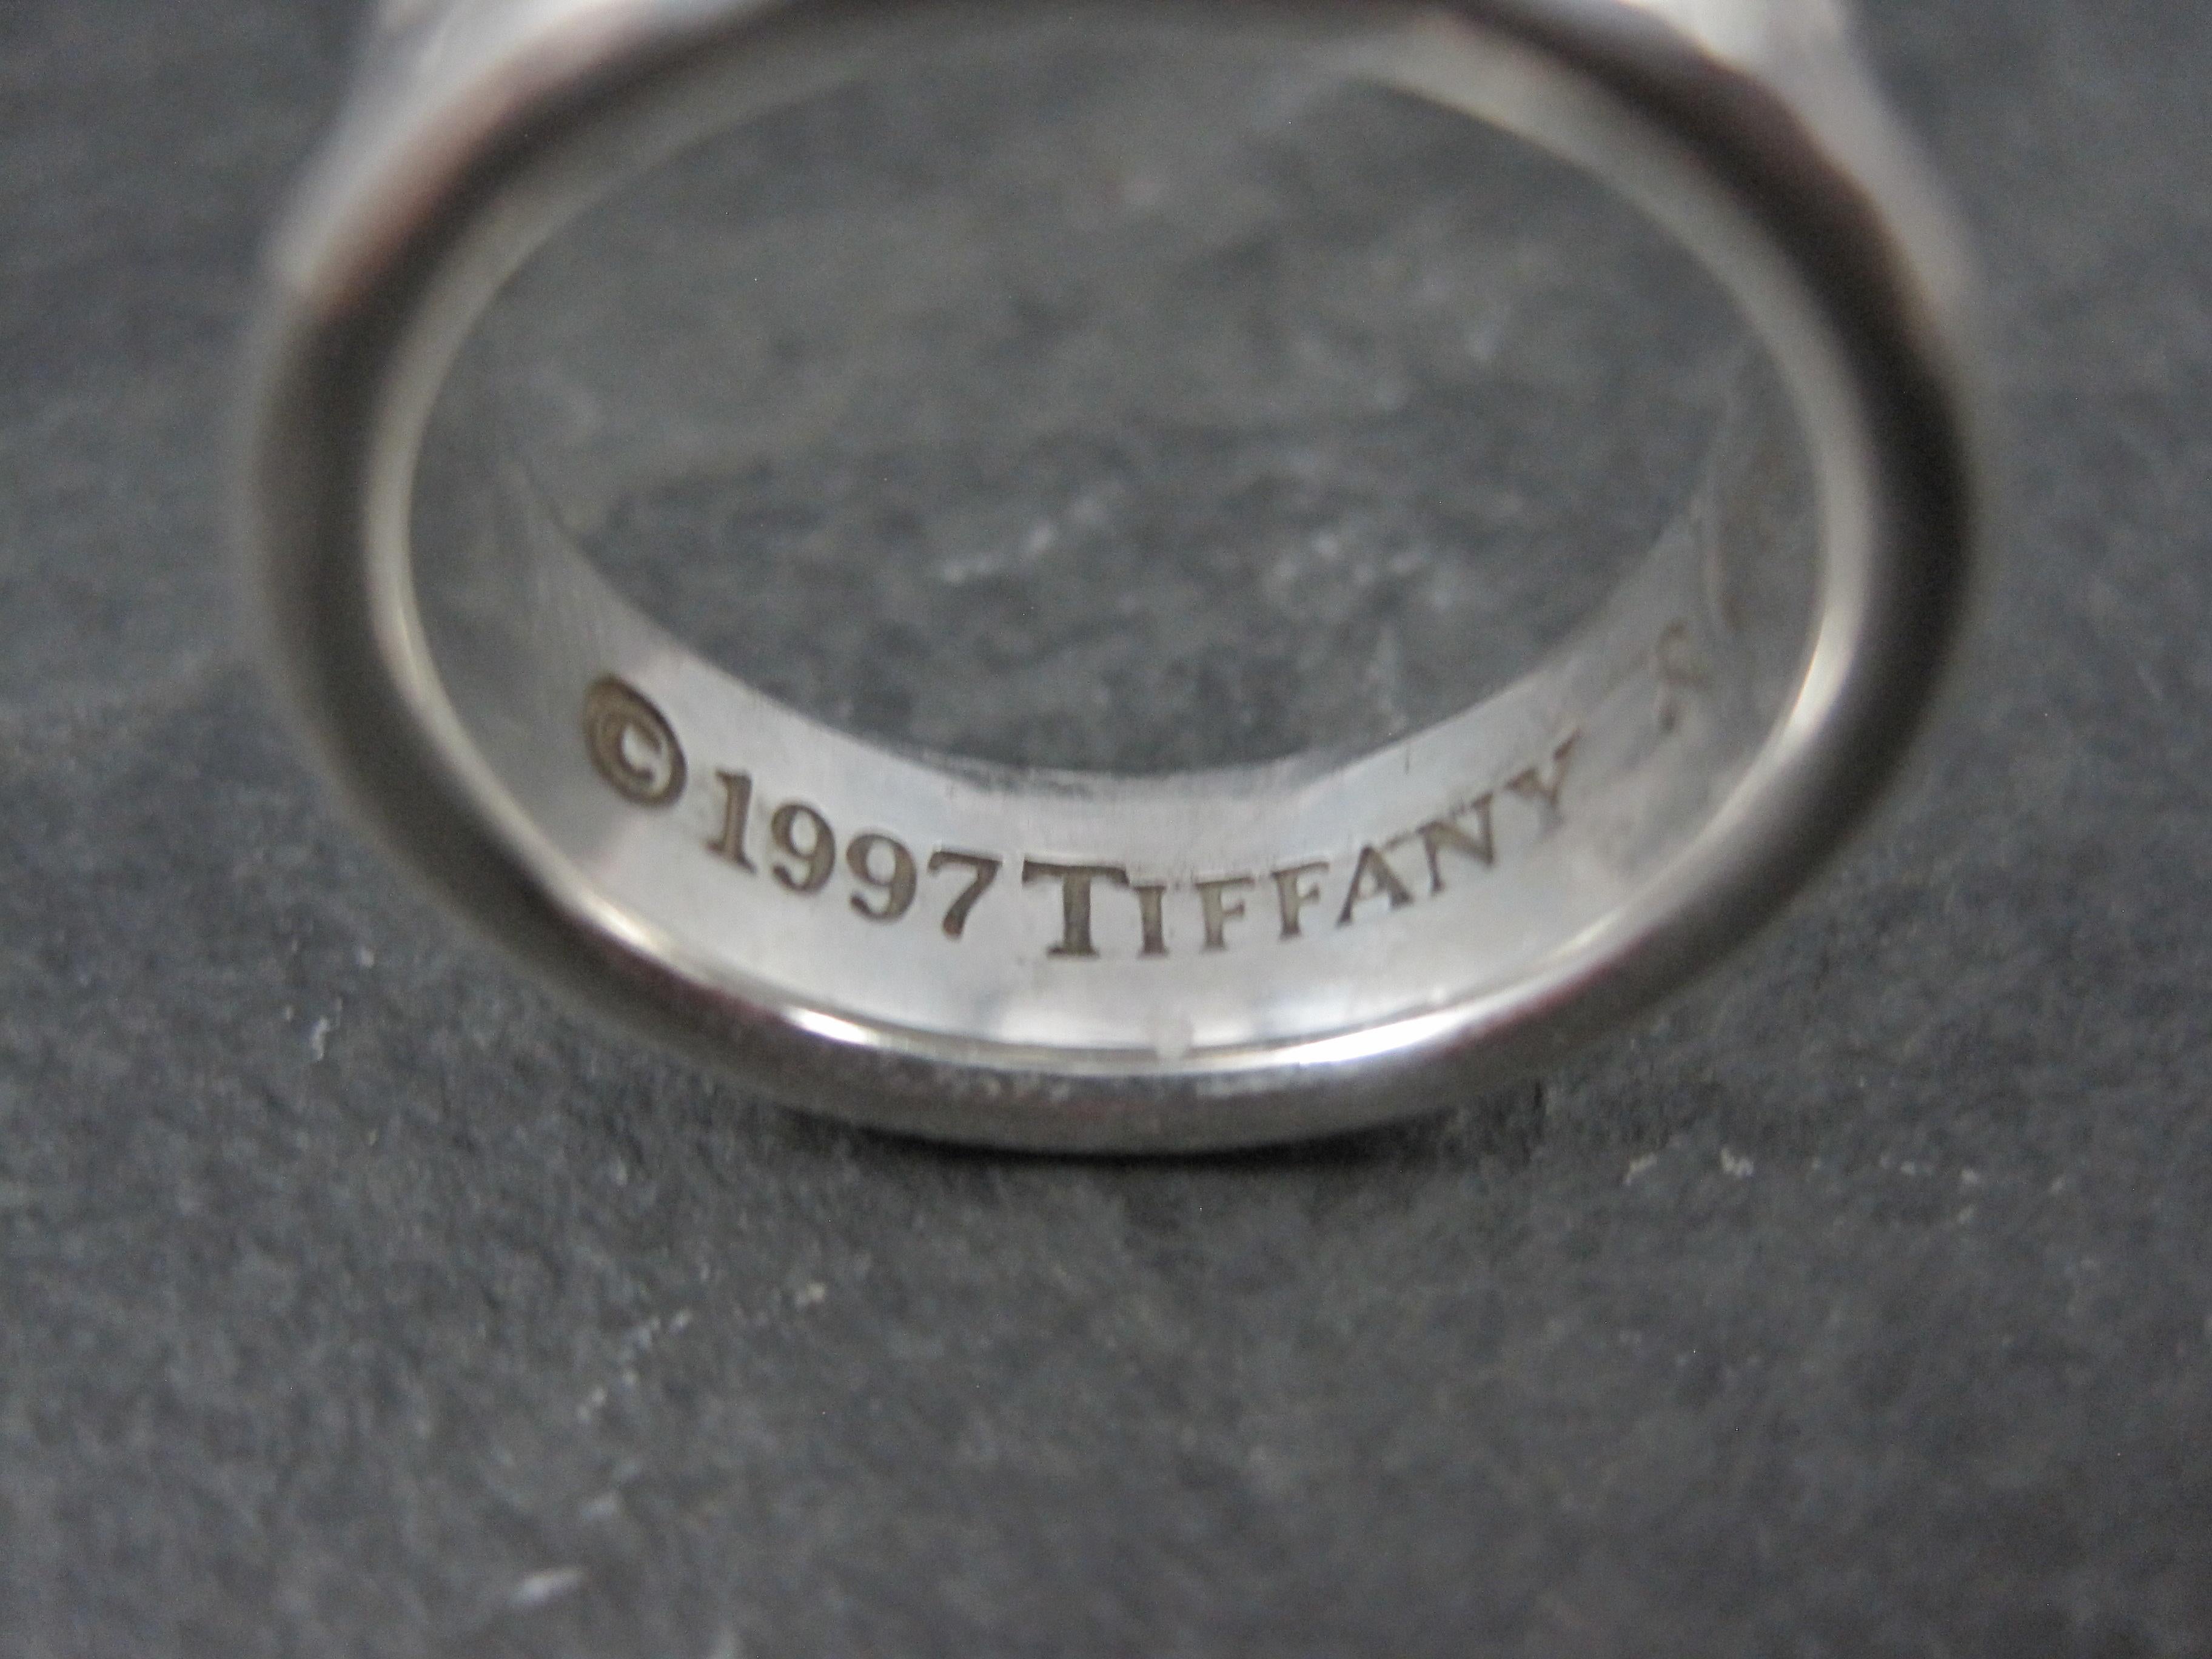 1997 Tiffany & Co 1837 Band Ring Sterling Silver Size 6.5 en vente 4